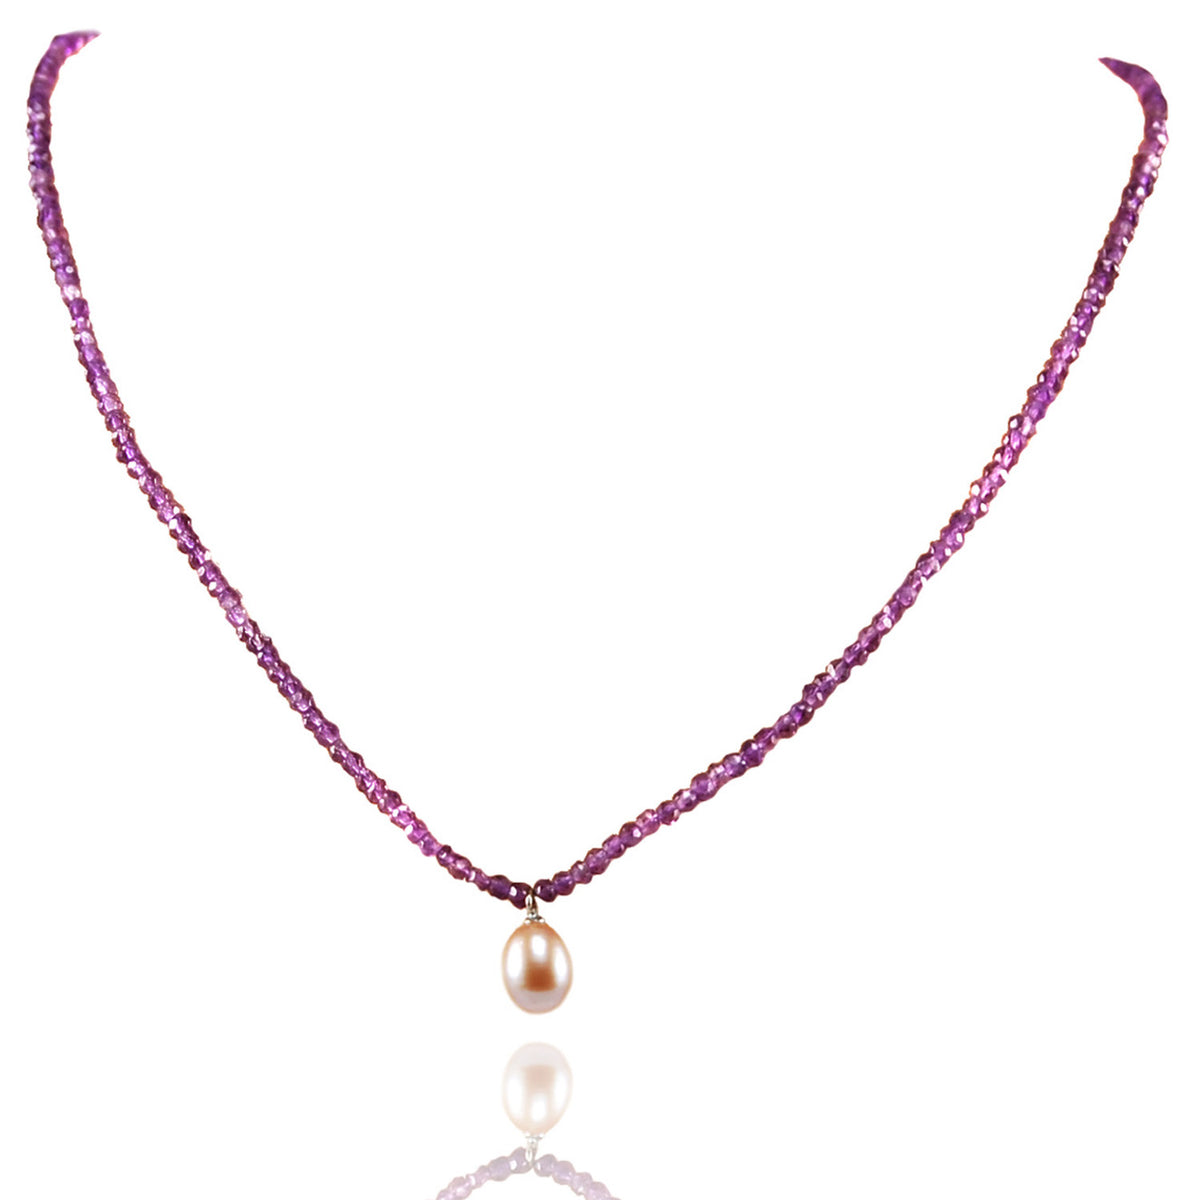 Amethyst Necklace with Freshwater Pearl Drop